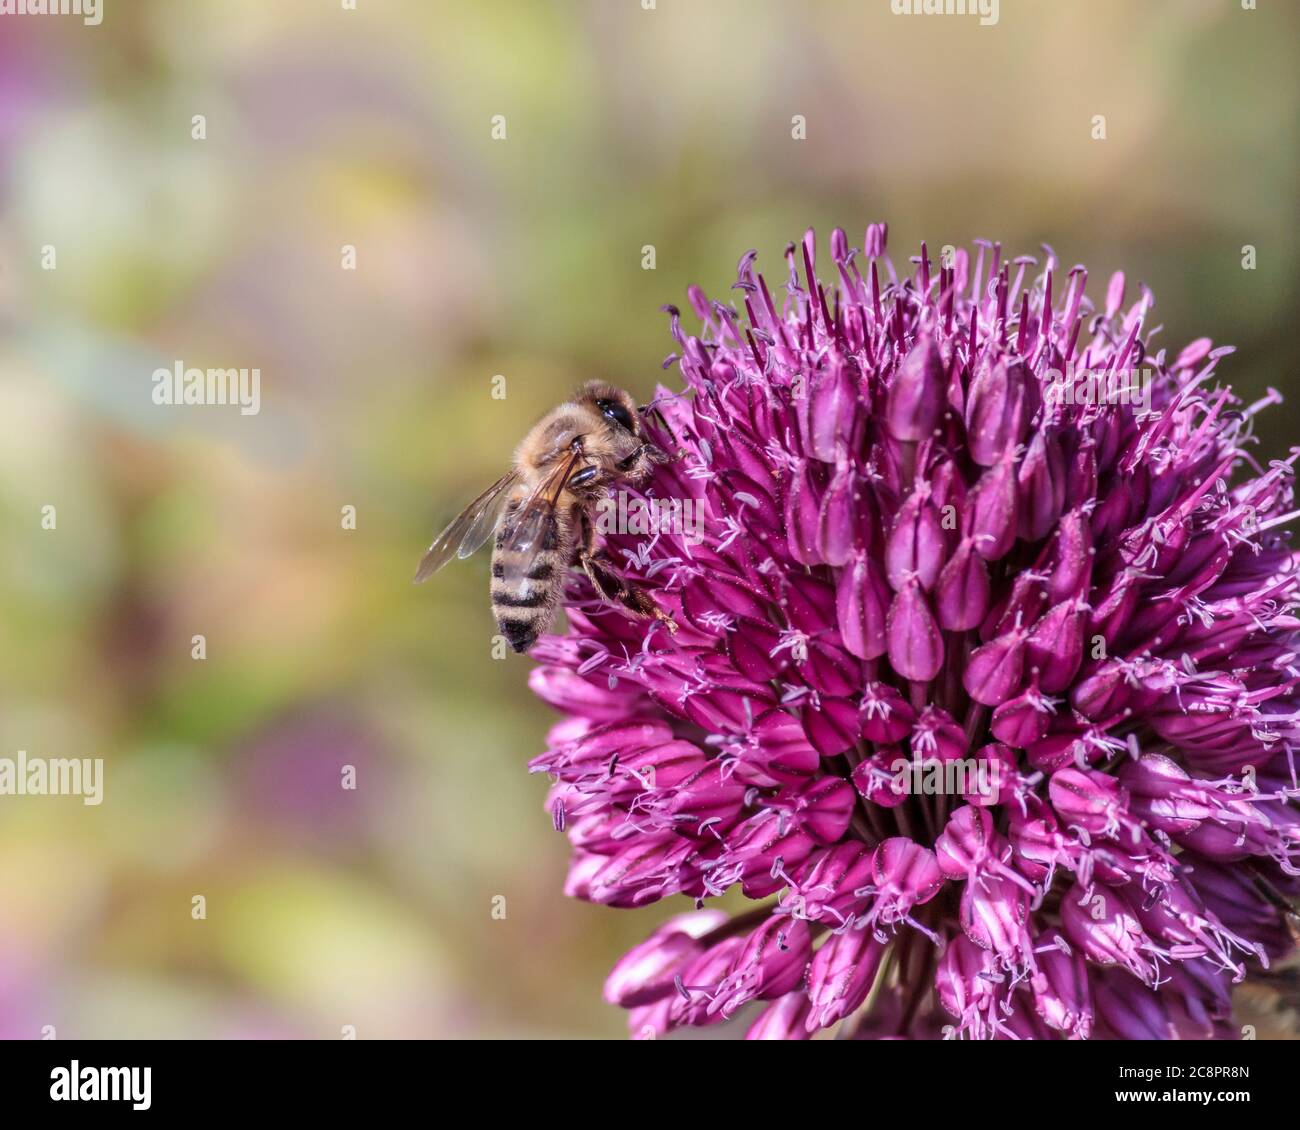 An eye level view, from the side, of a hairy honey bee with its segmented legs, gathering nectar from a bright purple Allium sphaerocephalon flower. Stock Photo